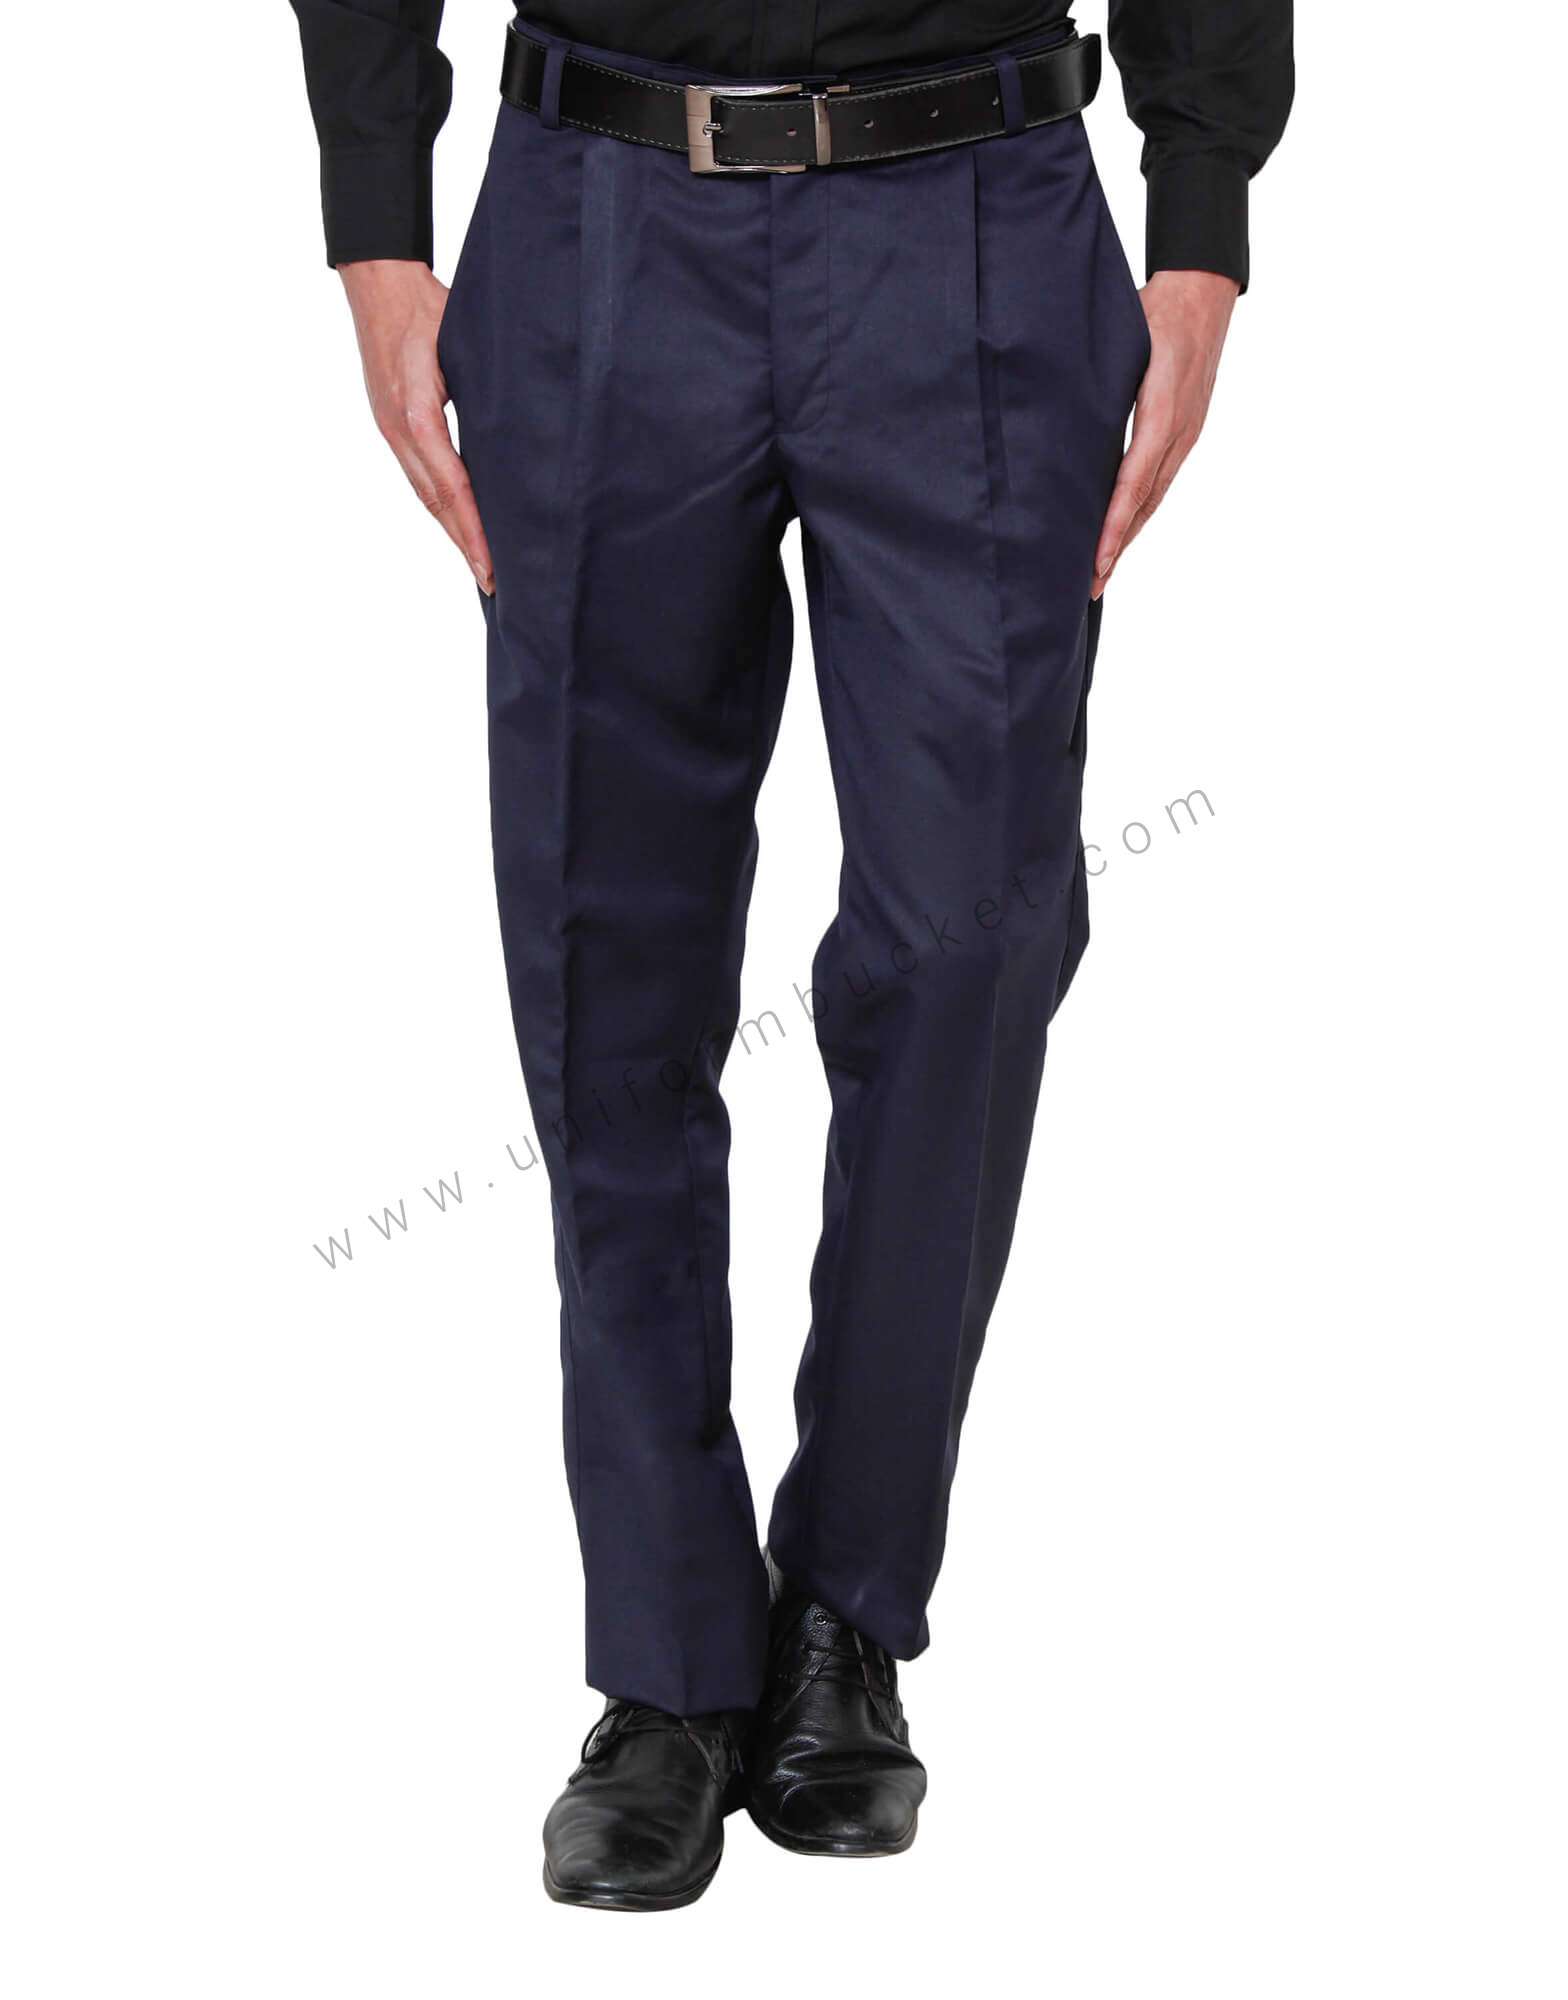 Buy Blue Trousers & Pants for Men by RAYMOND Online | Ajio.com-atpcosmetics.com.vn